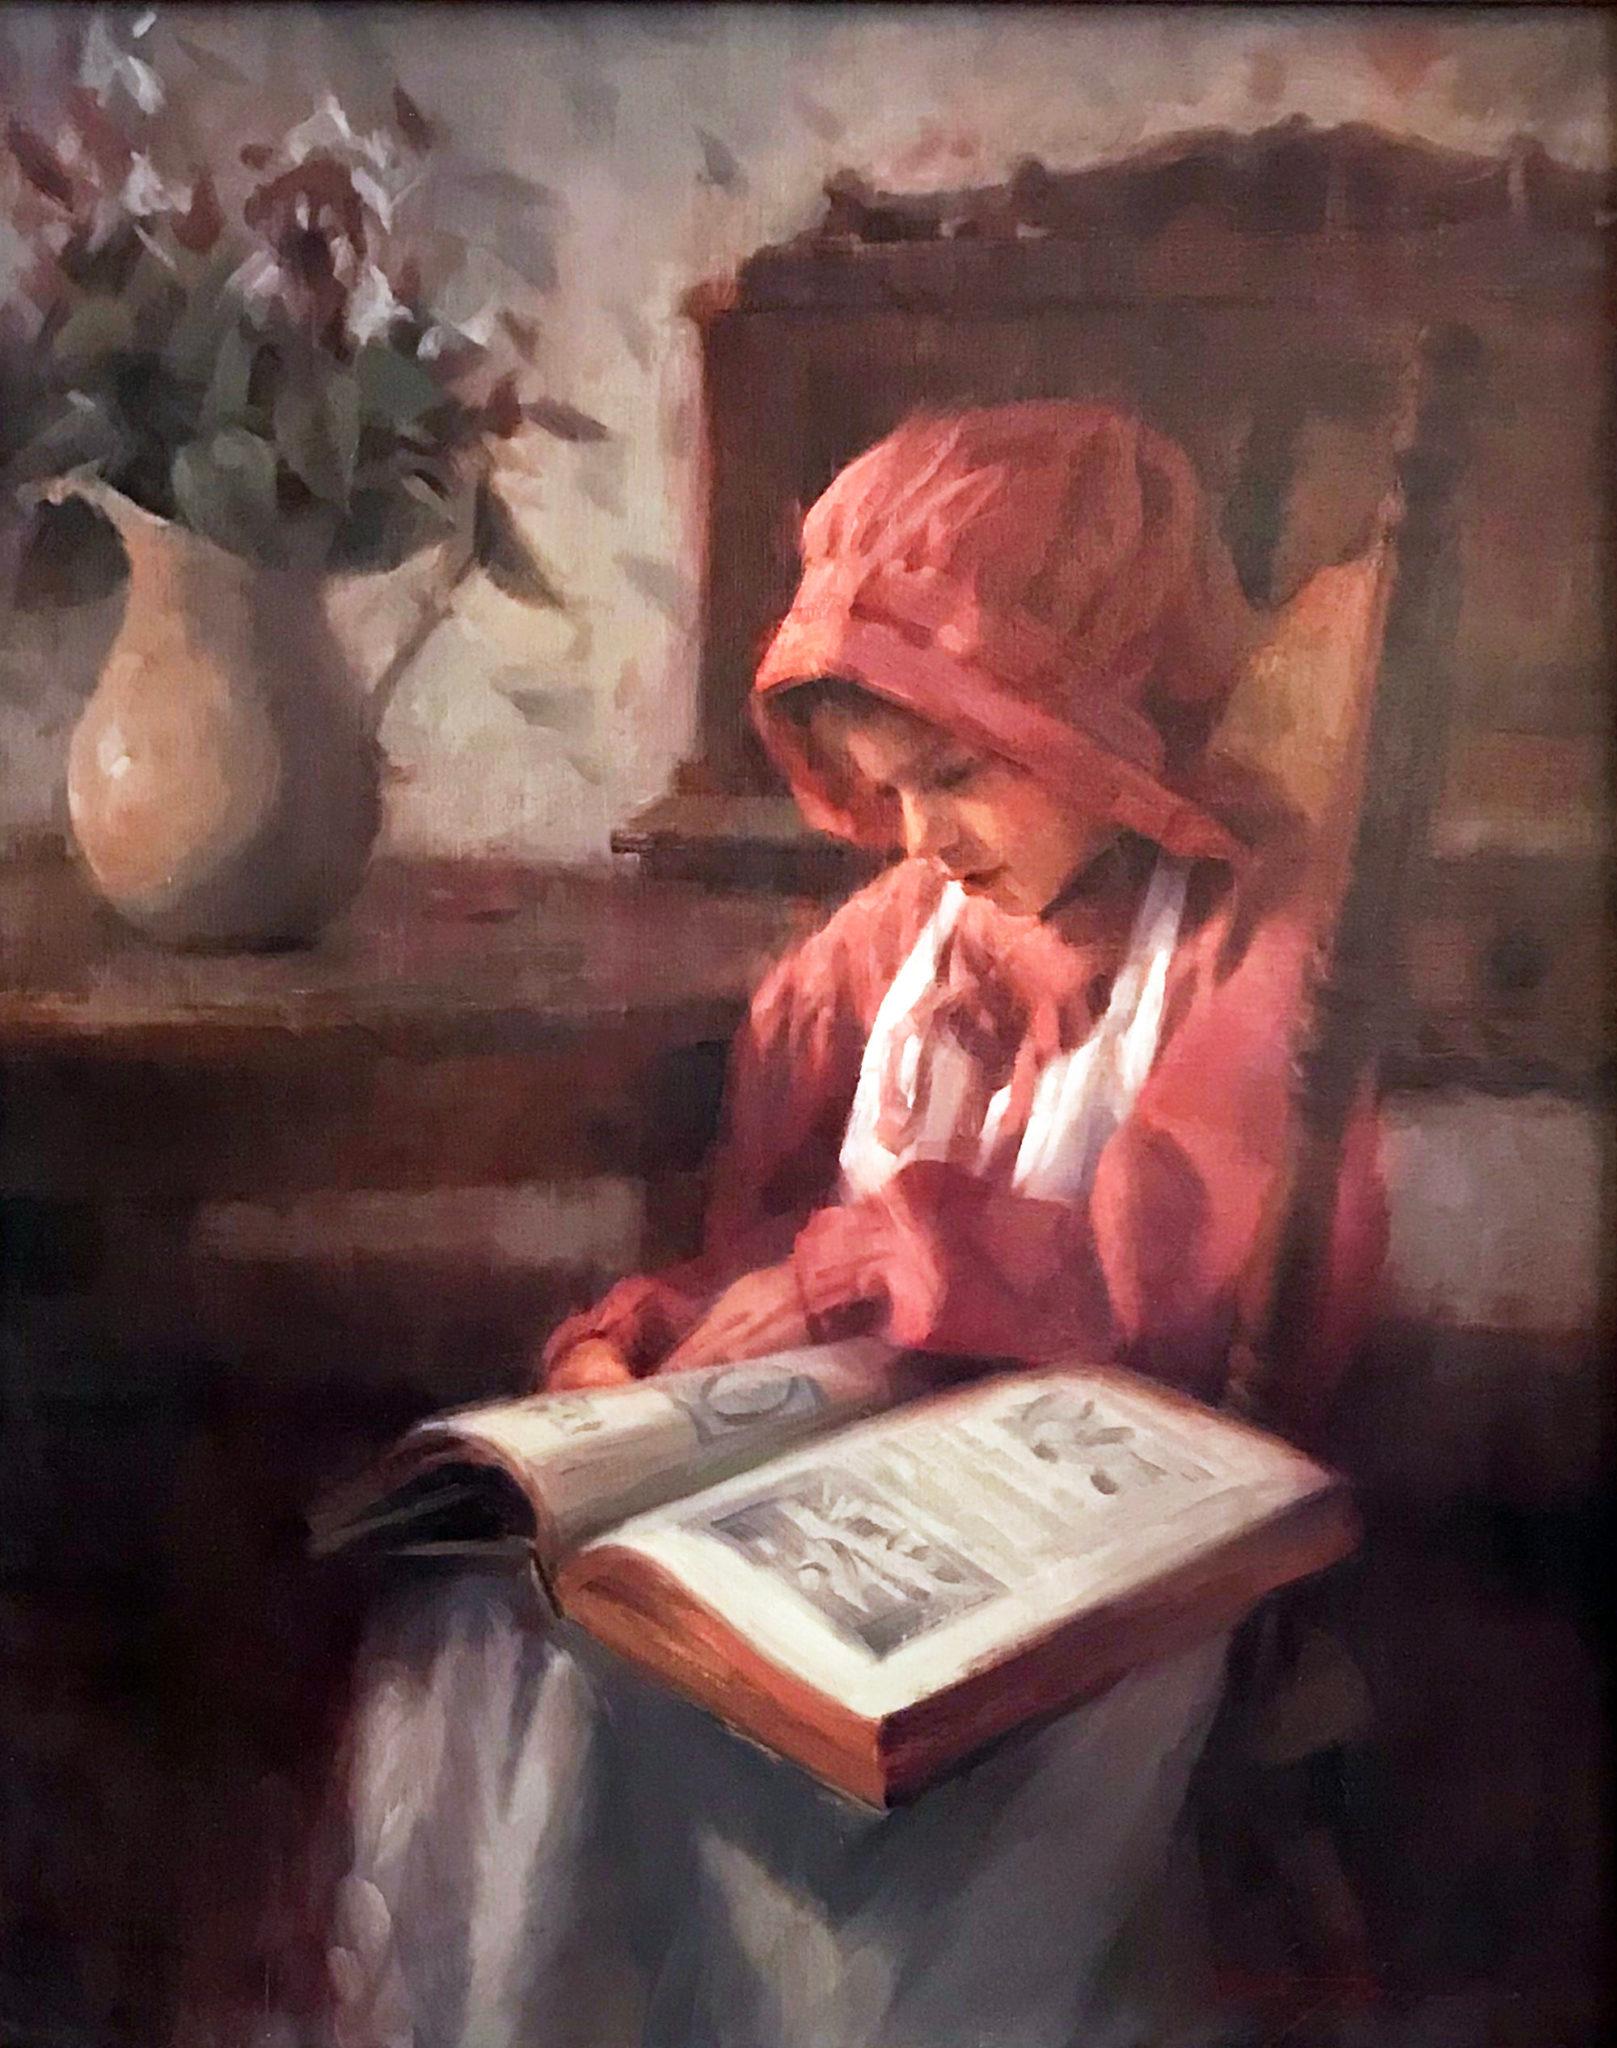 Remarkable portrait oil painting well listed American Plein Air Artist Chauncey Ray Homer (New Mexico, 1966 – )  Entitled “Once Upon A Time”  Oil on Canvas  Housed in a large beautiful ornate wood frame  Measures approx. 43″ H x 37″ W with